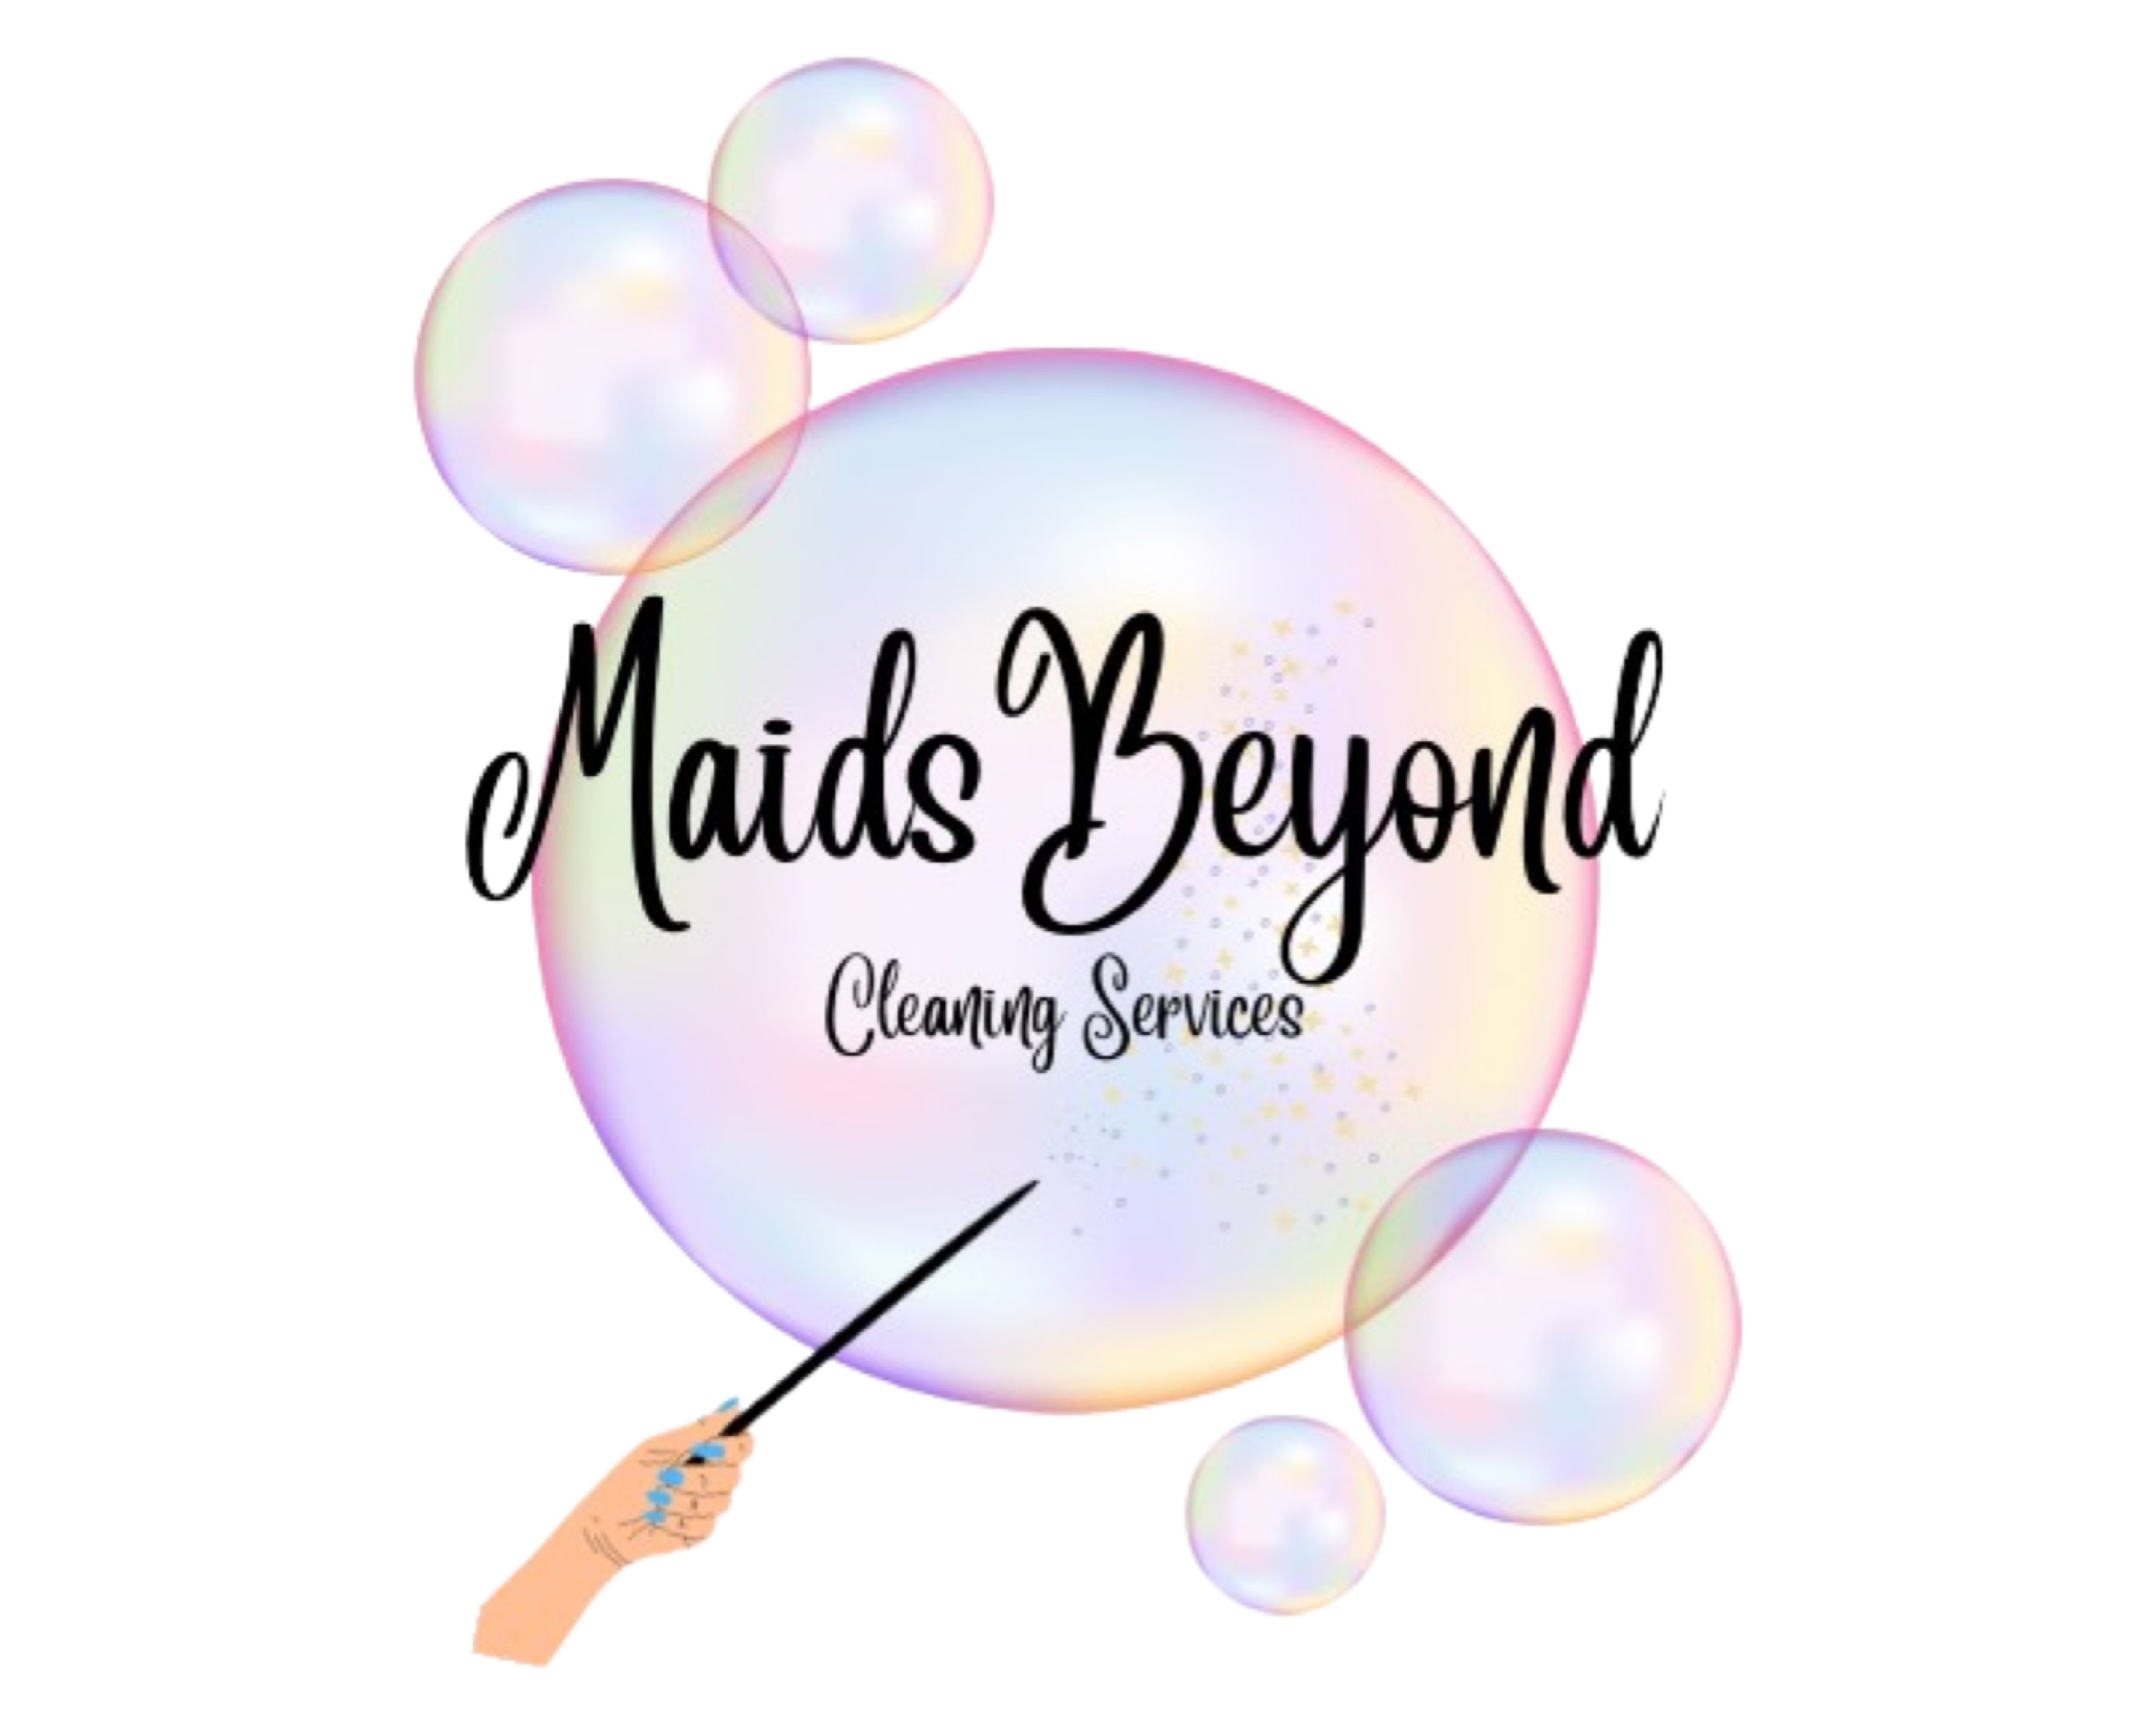 MaidsBeyond Cleaning and Services Logo